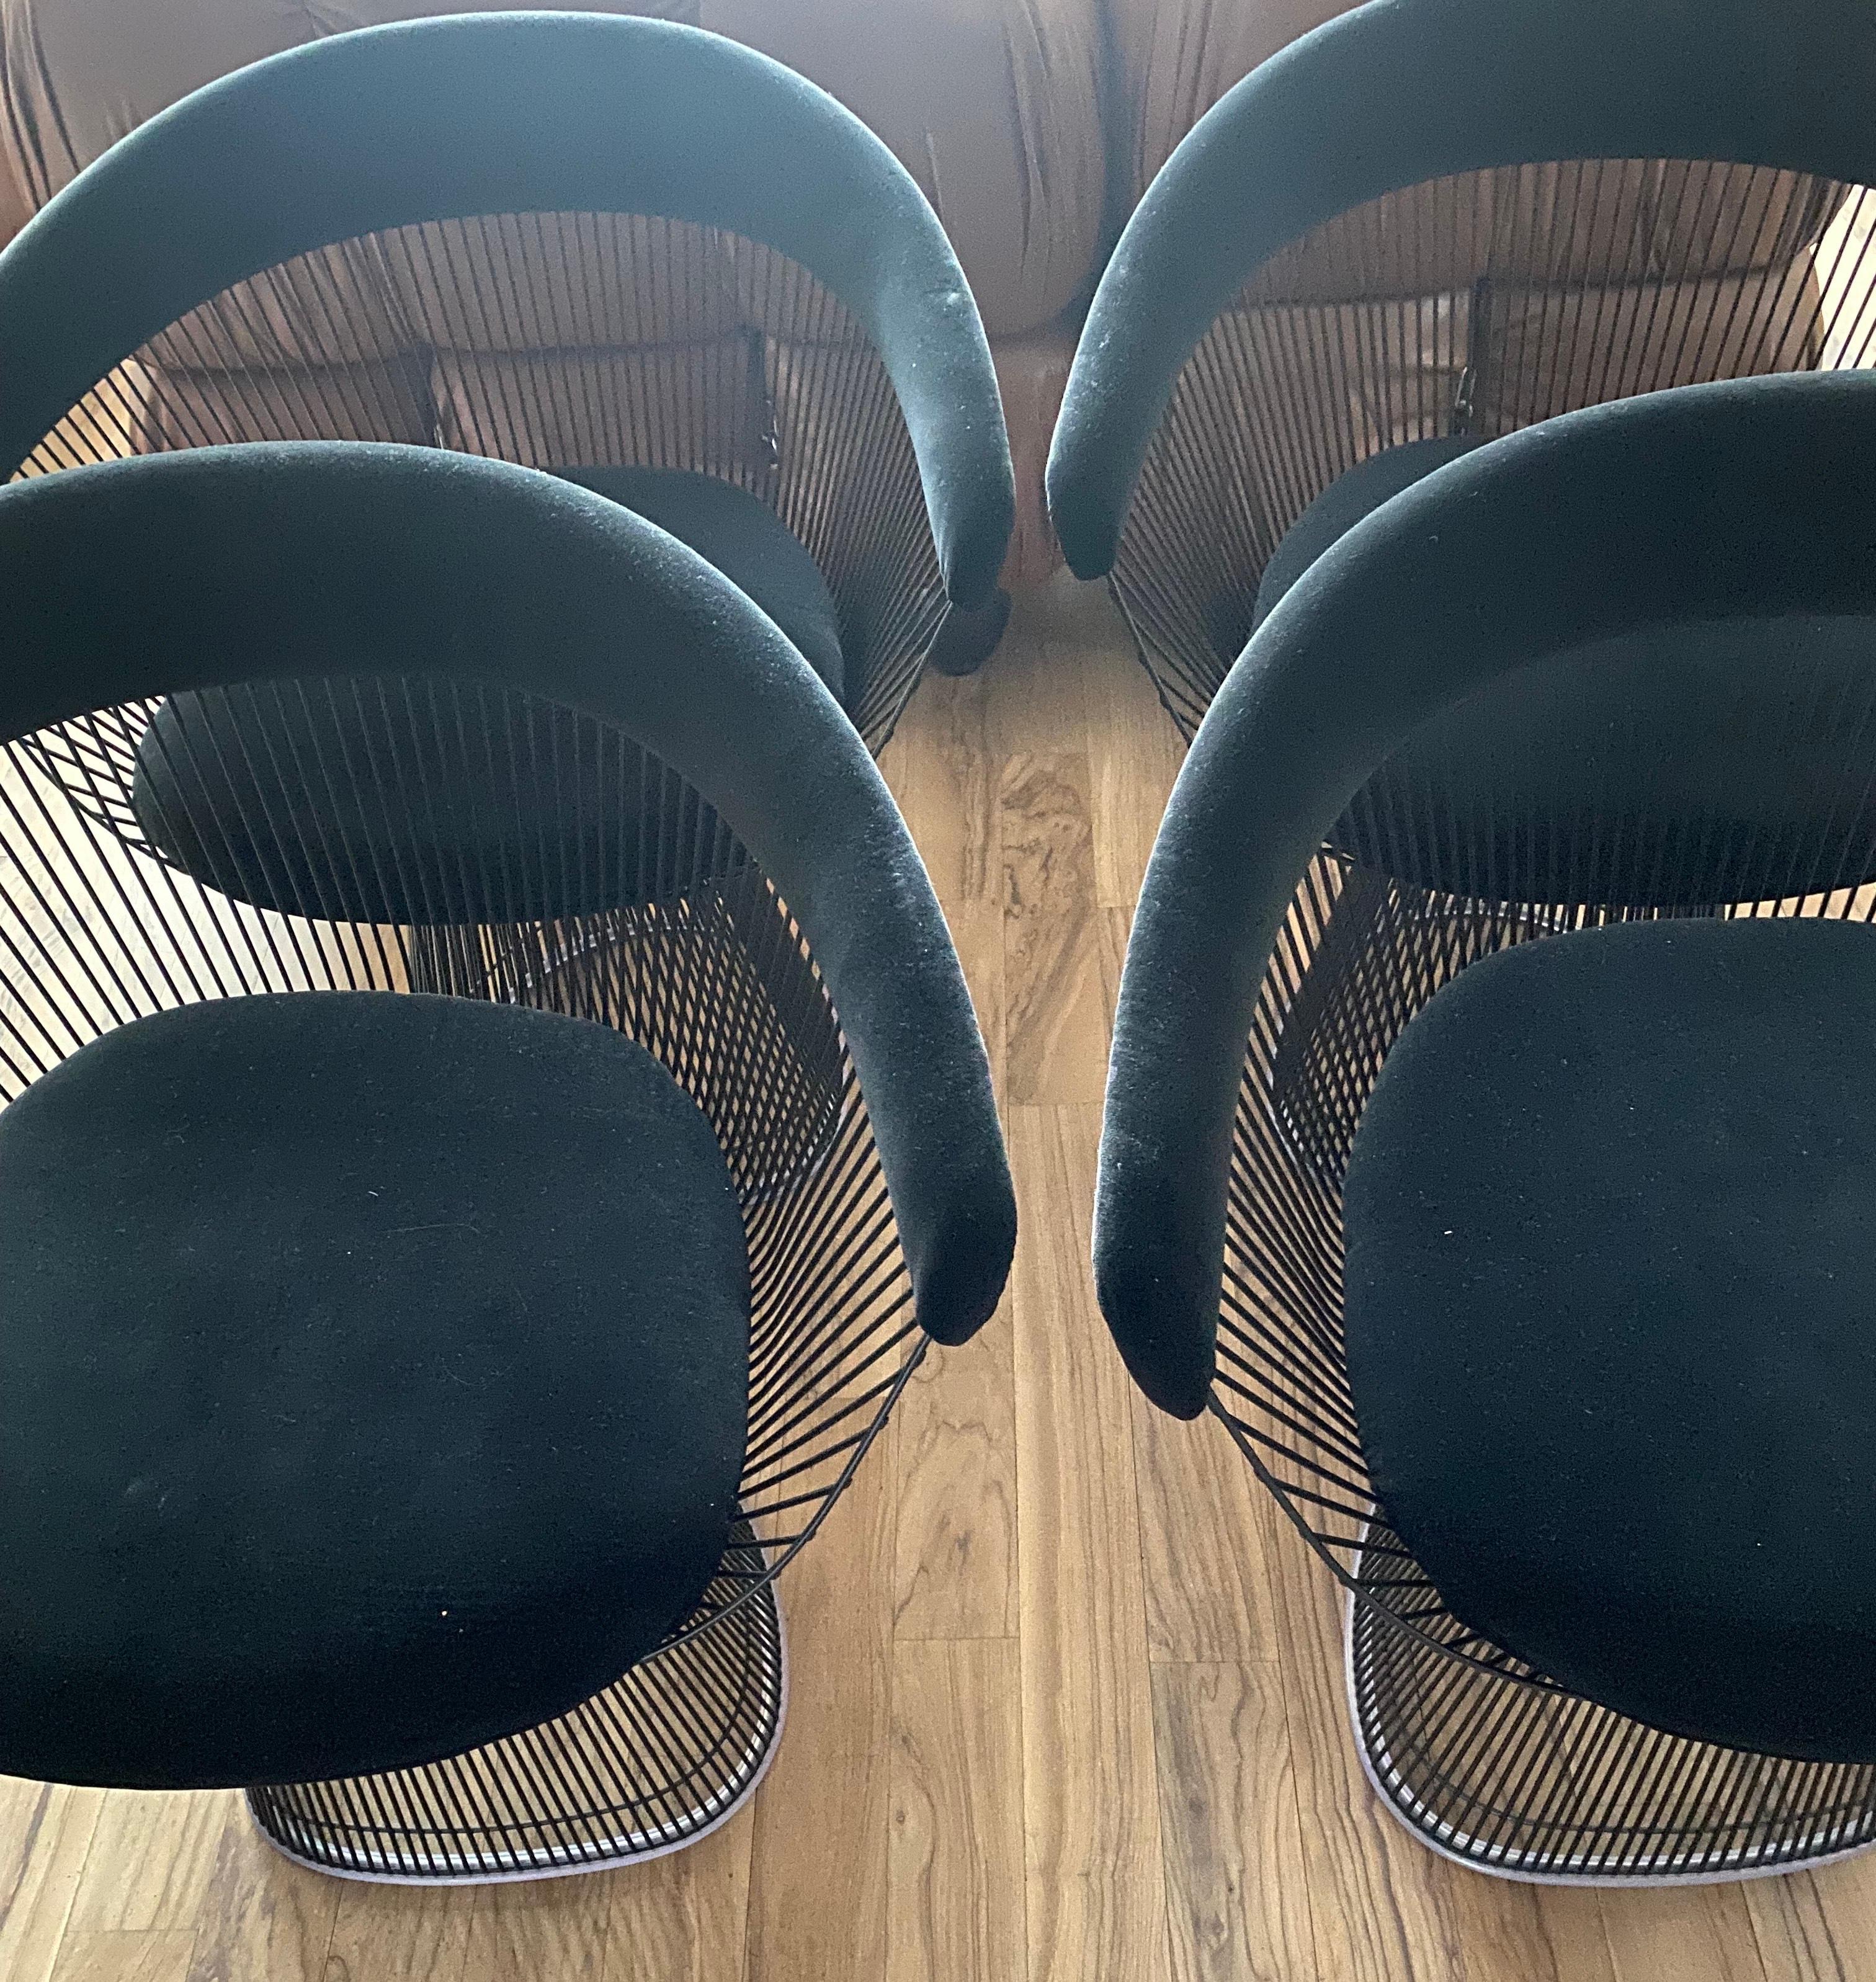 Armchairs by Warren platner 
Suite of 4 platner armchairs
knoll edition 
Black edition
Black velvet / blackened steel
Limited edition 
Perfect condition 
2021
Price: 12900 12900 euros for 4.